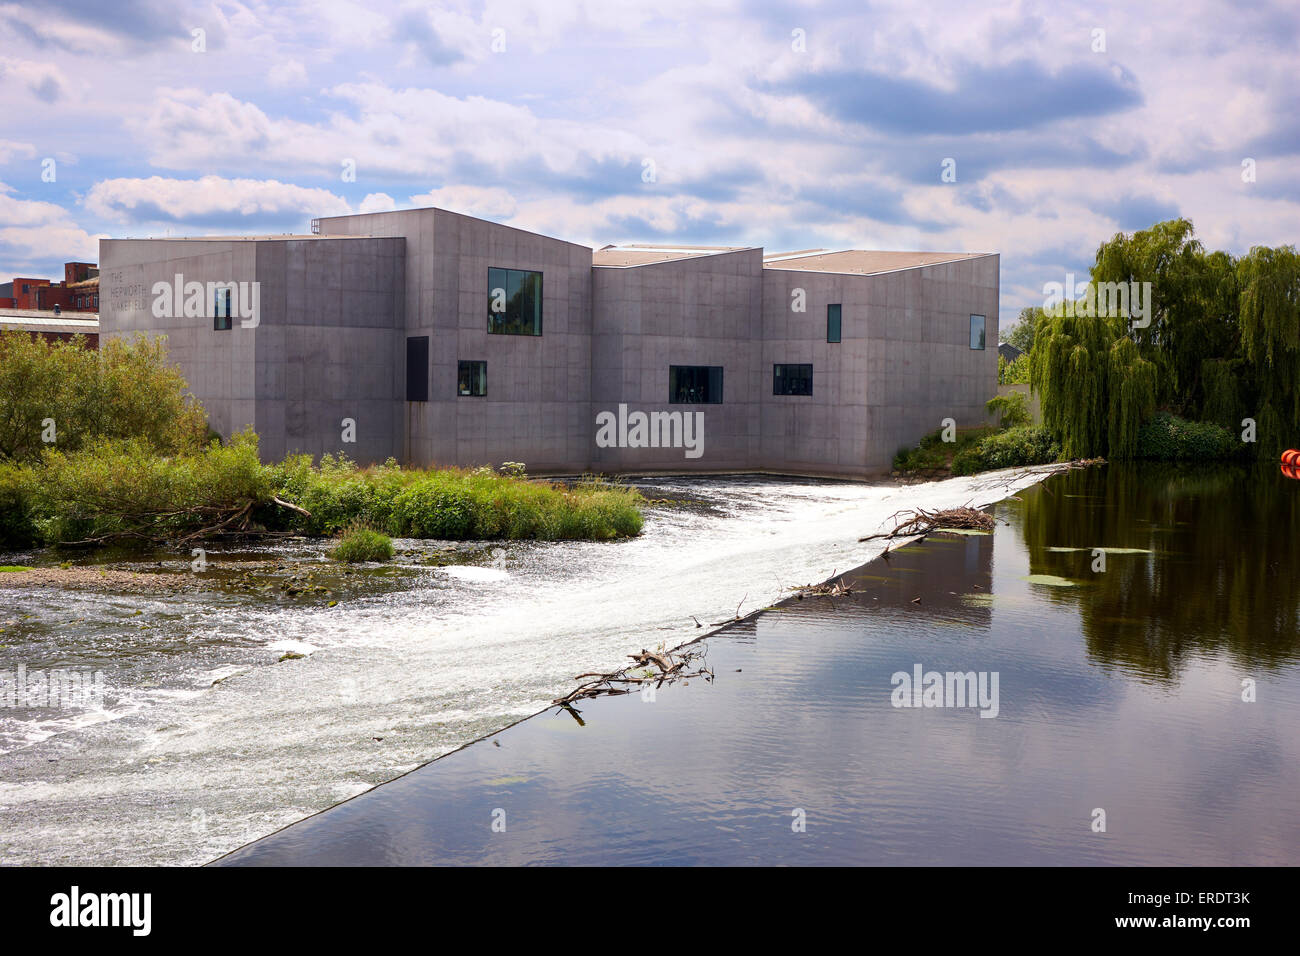 The Hepworth Wakefield. An art gallery designed by David Chipperfield on the  River Calder, Wakefield, West Yorkshire UK Stock Photo